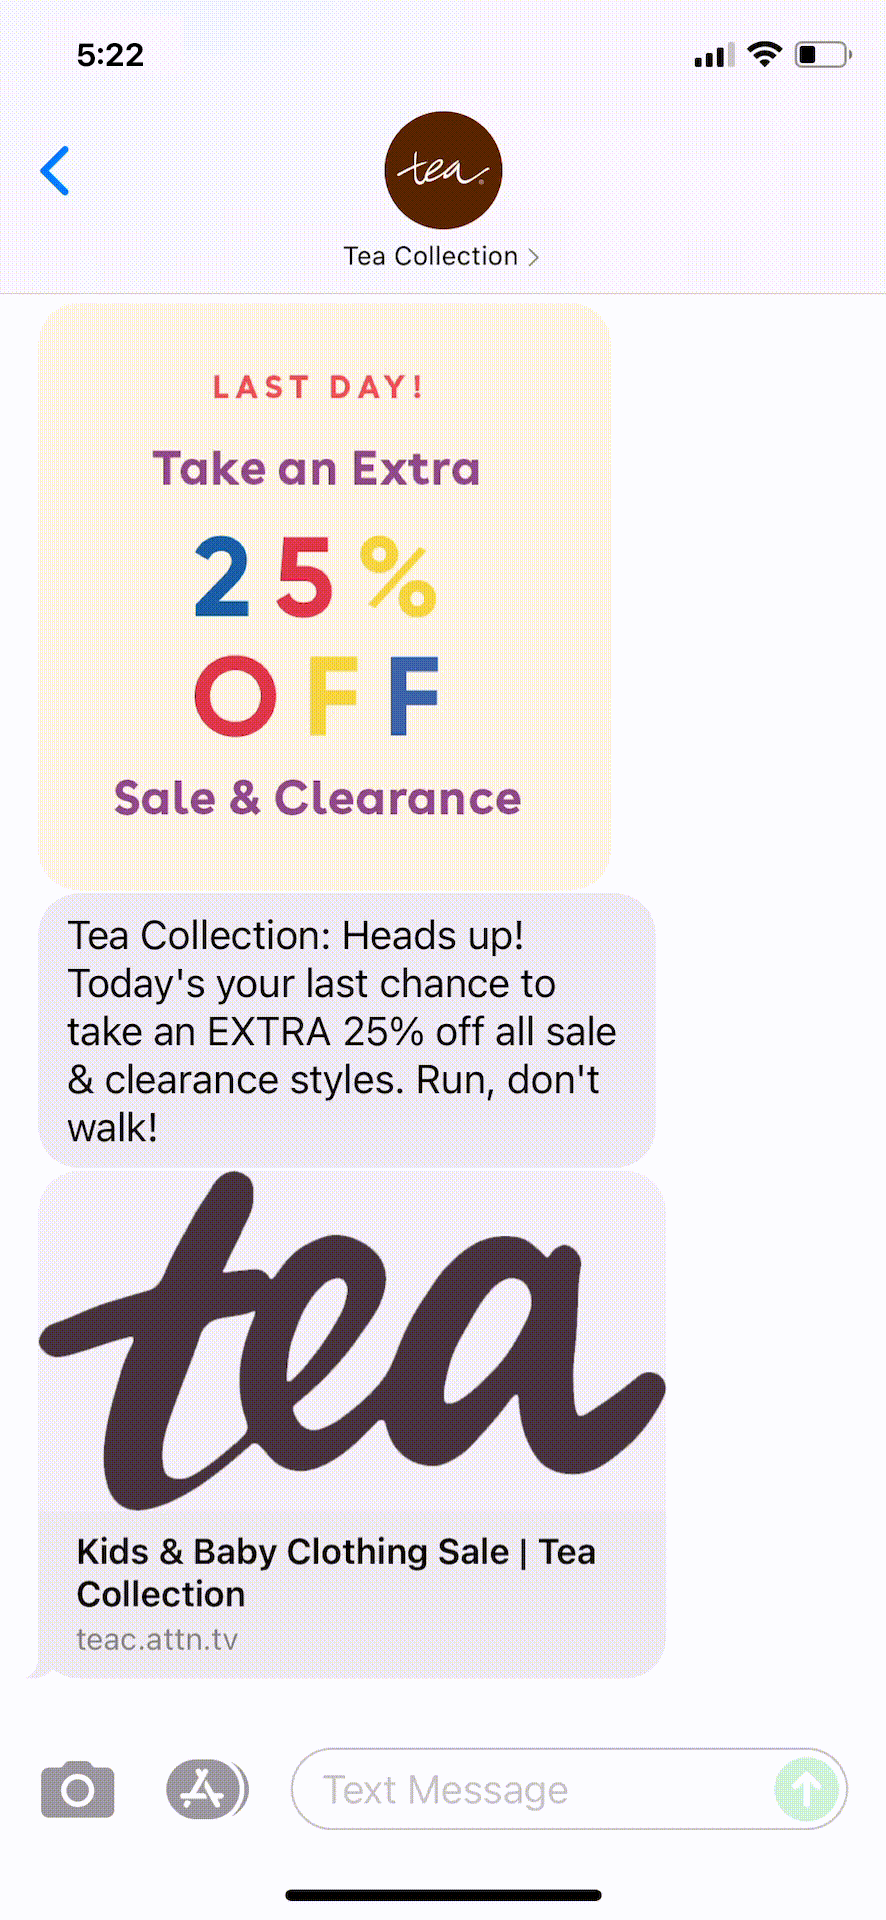 Tea-Collection-Text-Message-Marketing-Example-07.25.2021